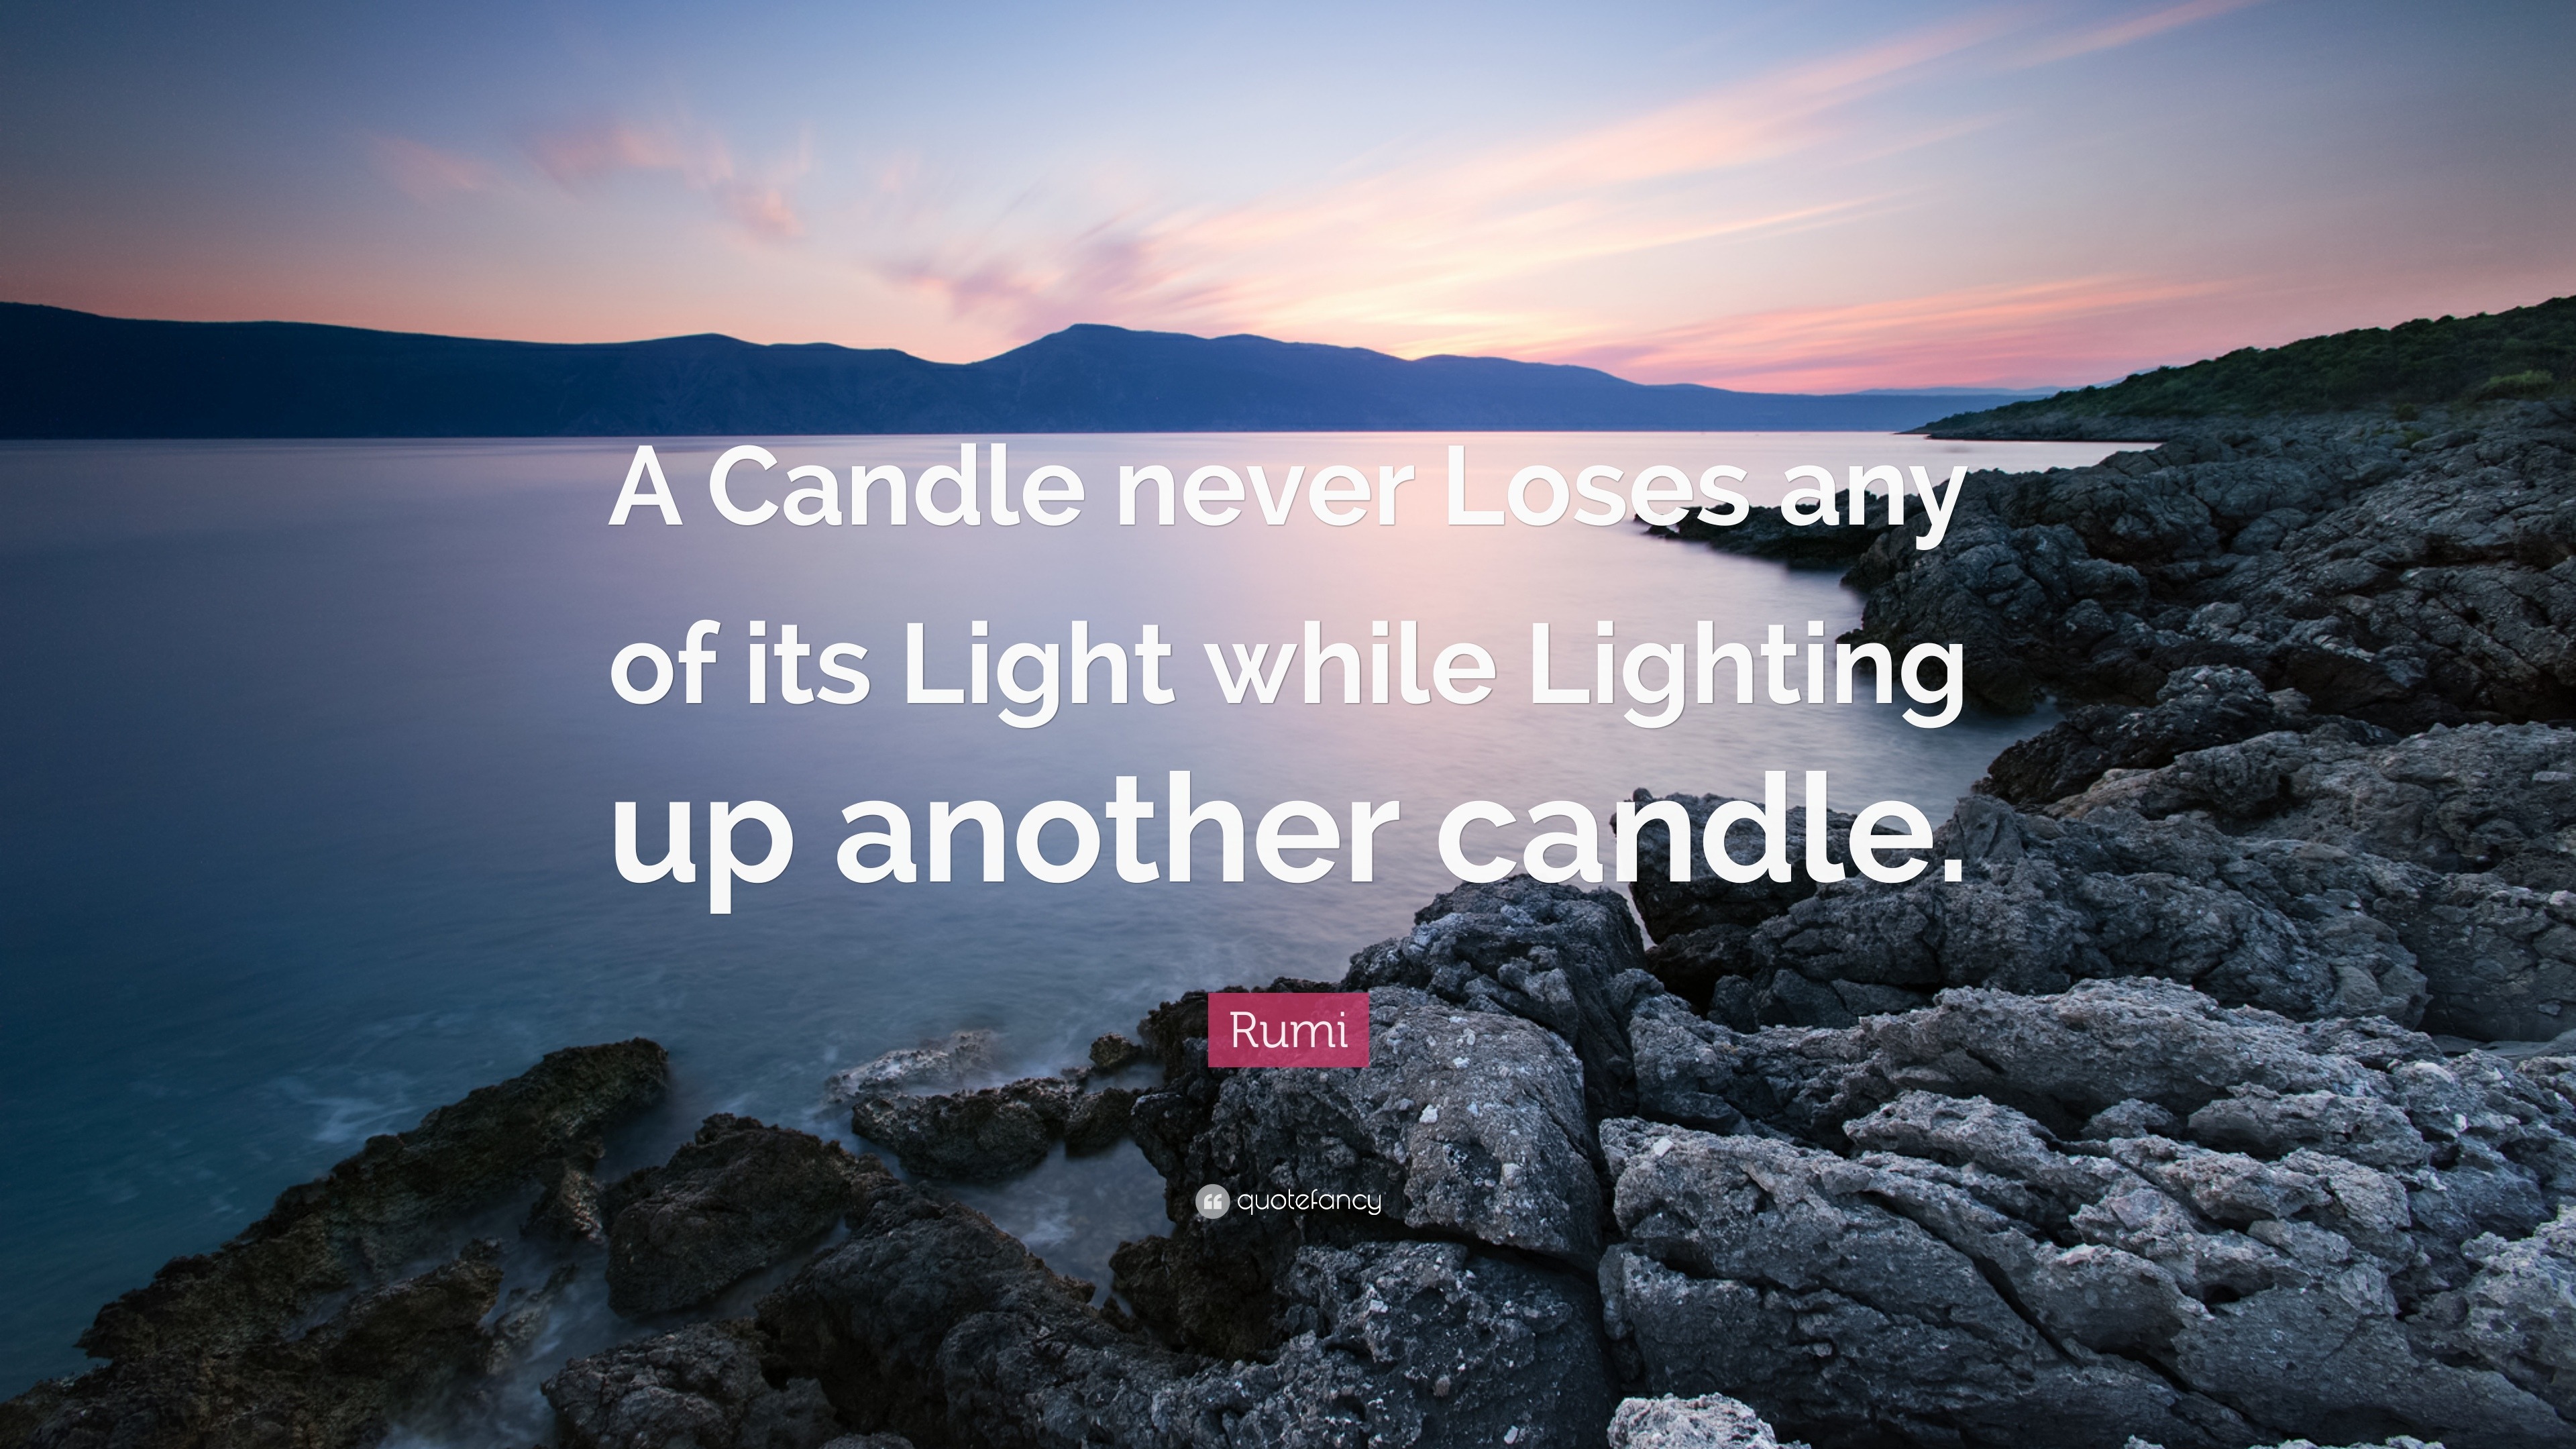 Rumi Quote: Candle never Loses any of its Light while Lighting another candle.”